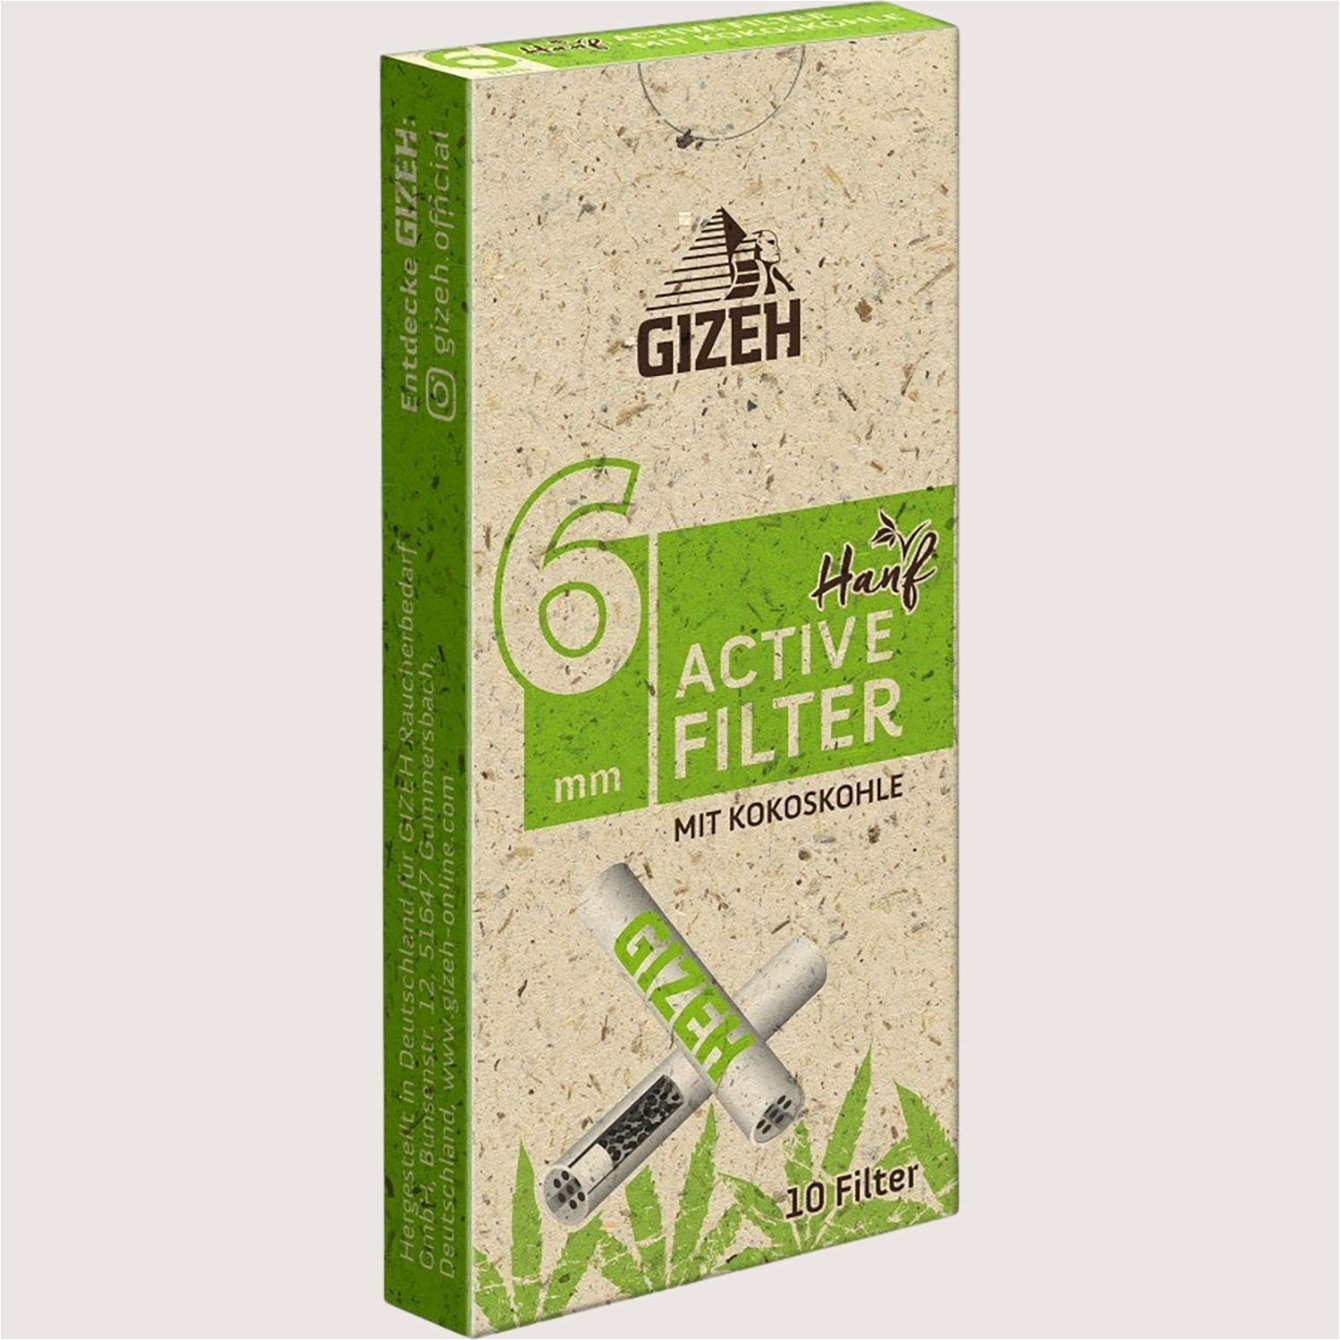 Gizeh Hanf Active Filter 6 mm 10 Filter